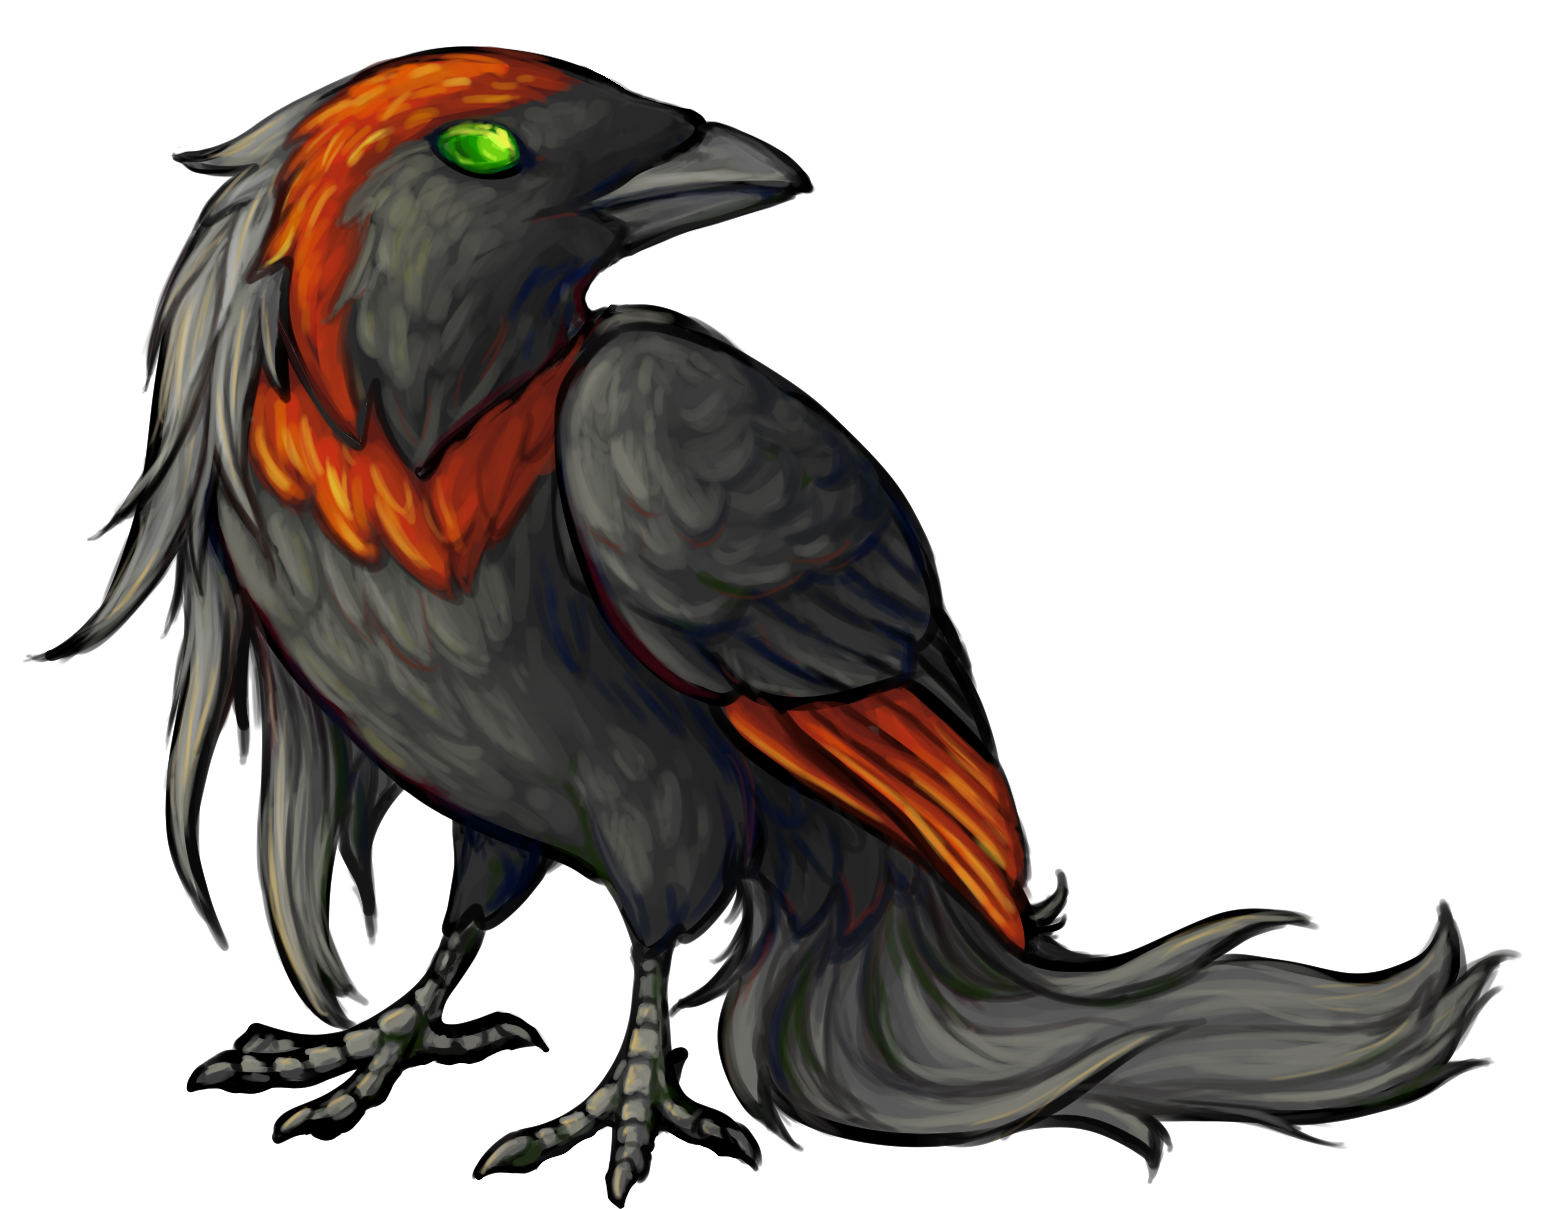 Velia, the first maned crow ever made